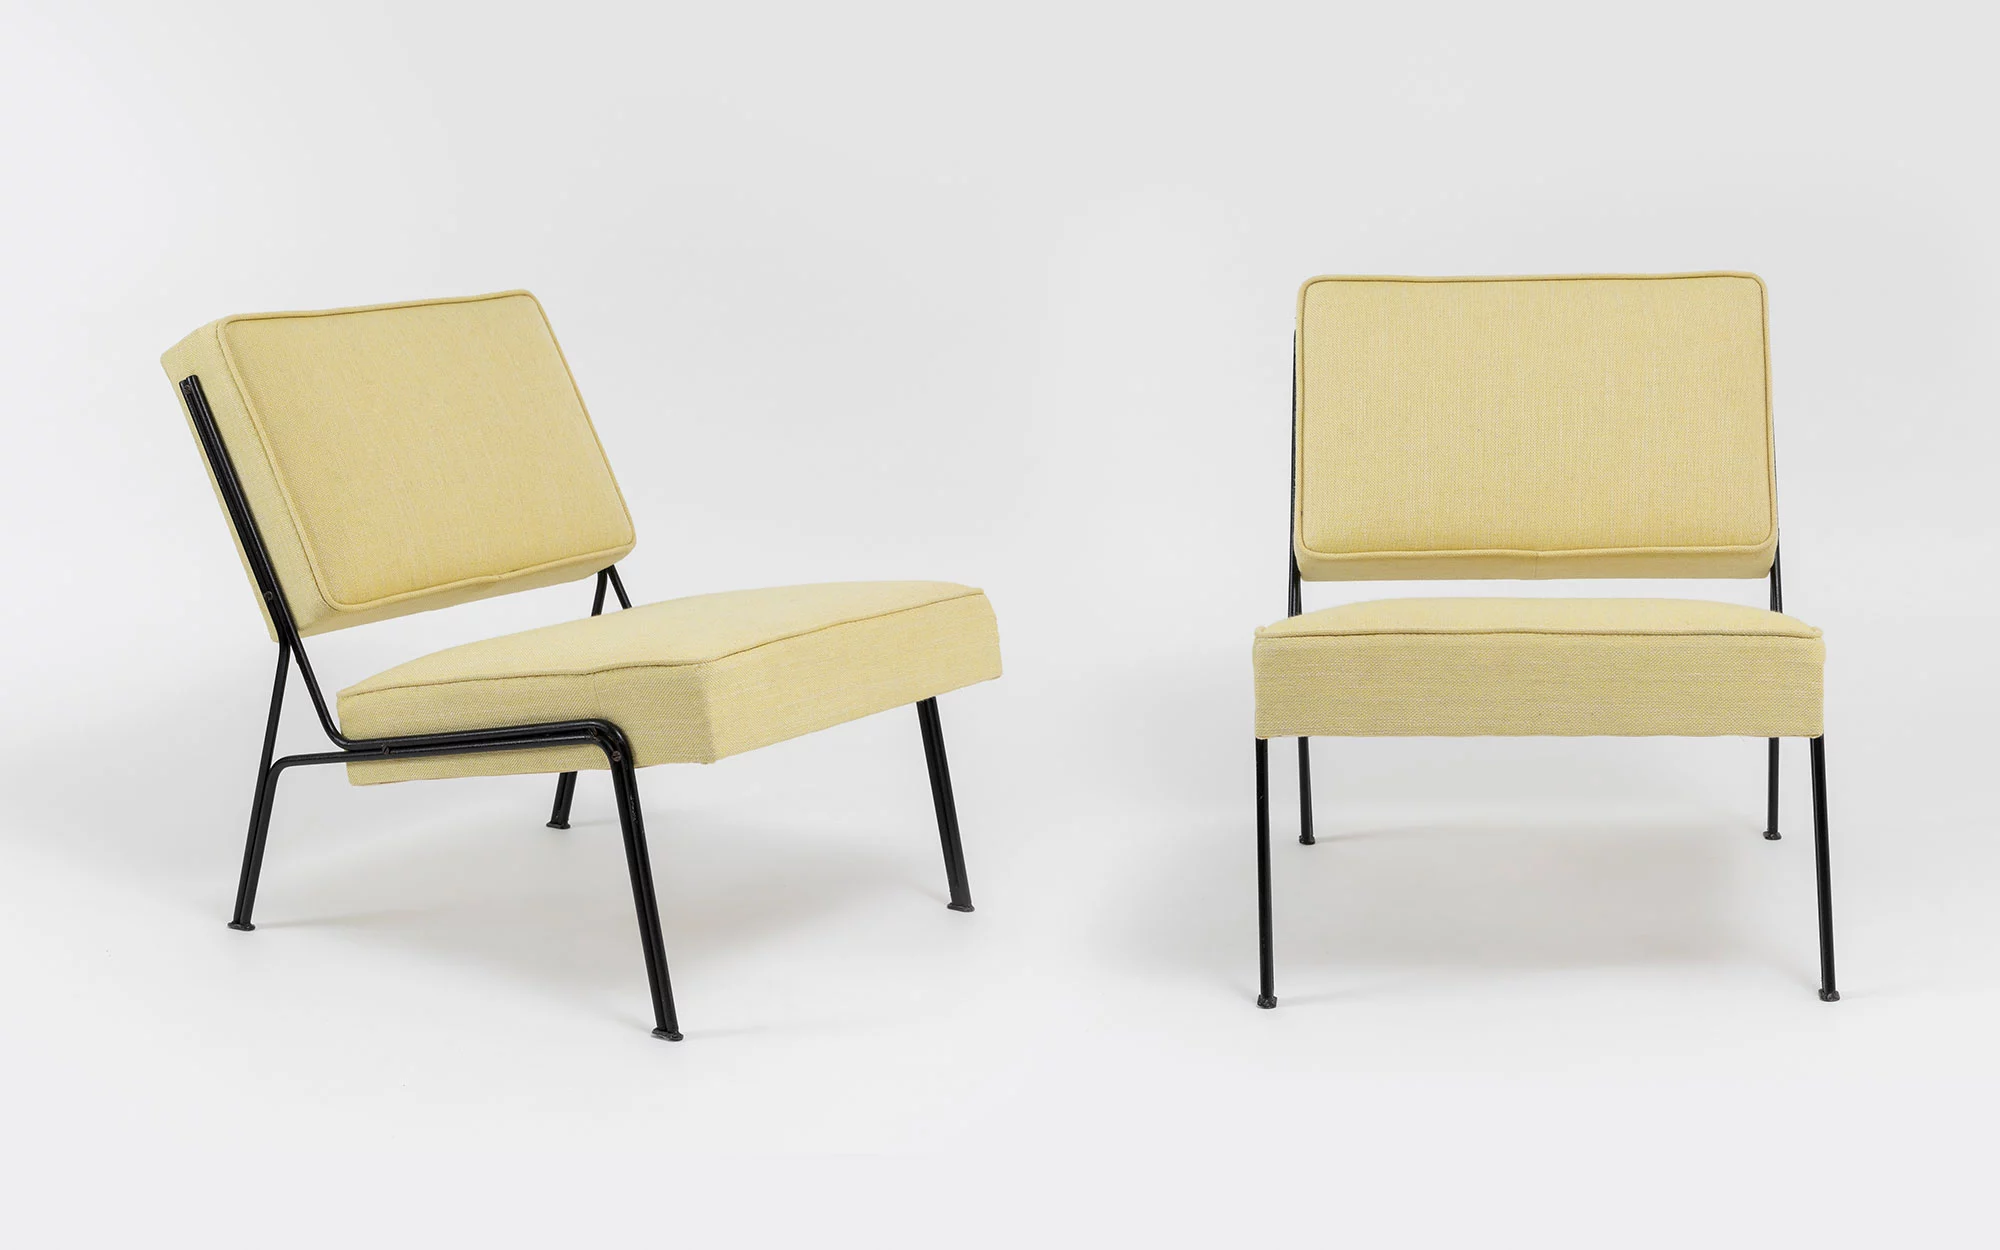 854 -   A.R.P - Seating - Galerie kreo